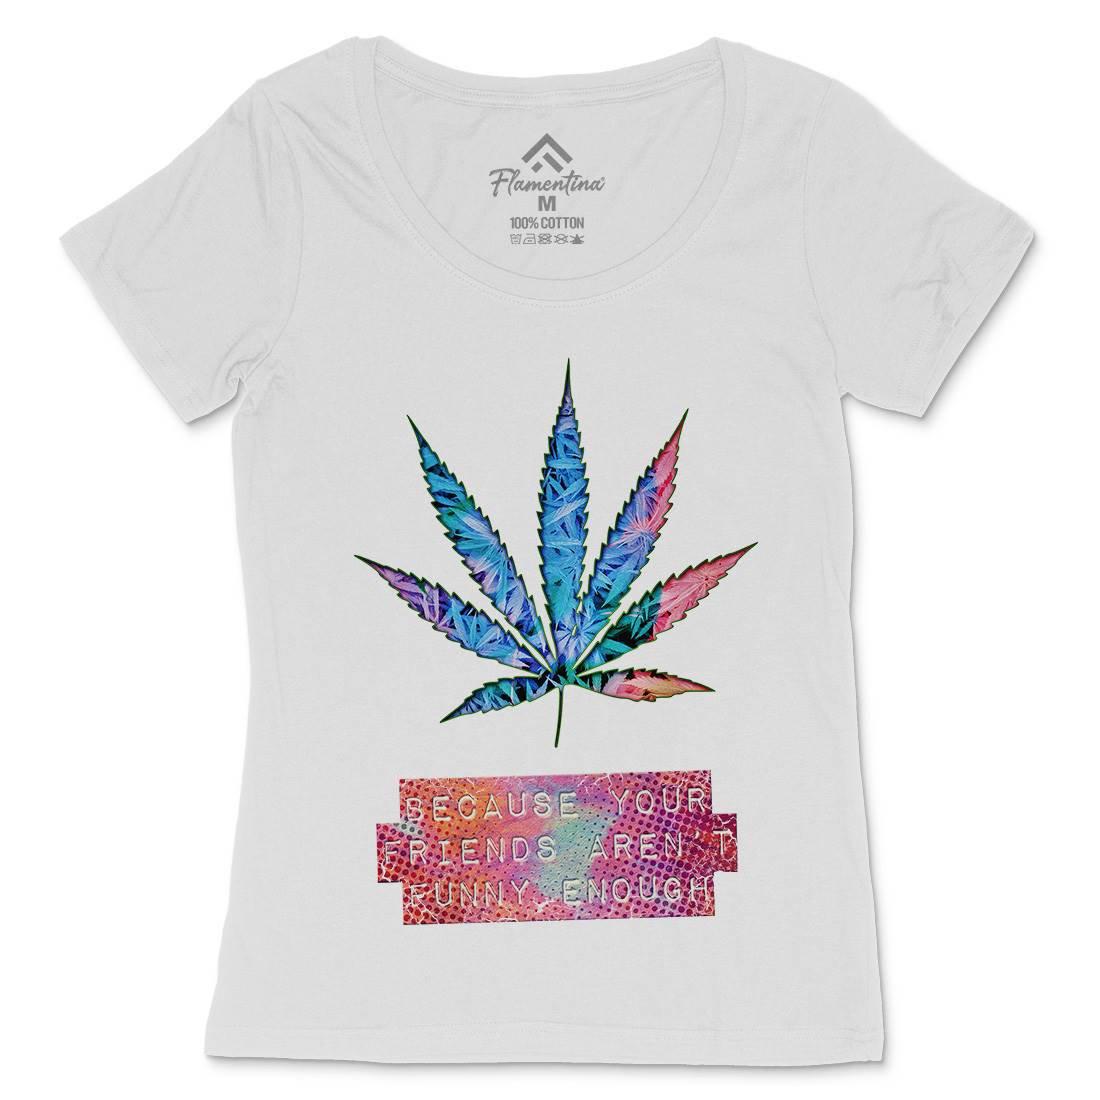 Mj Fact Womens Scoop Neck T-Shirt Drugs A879